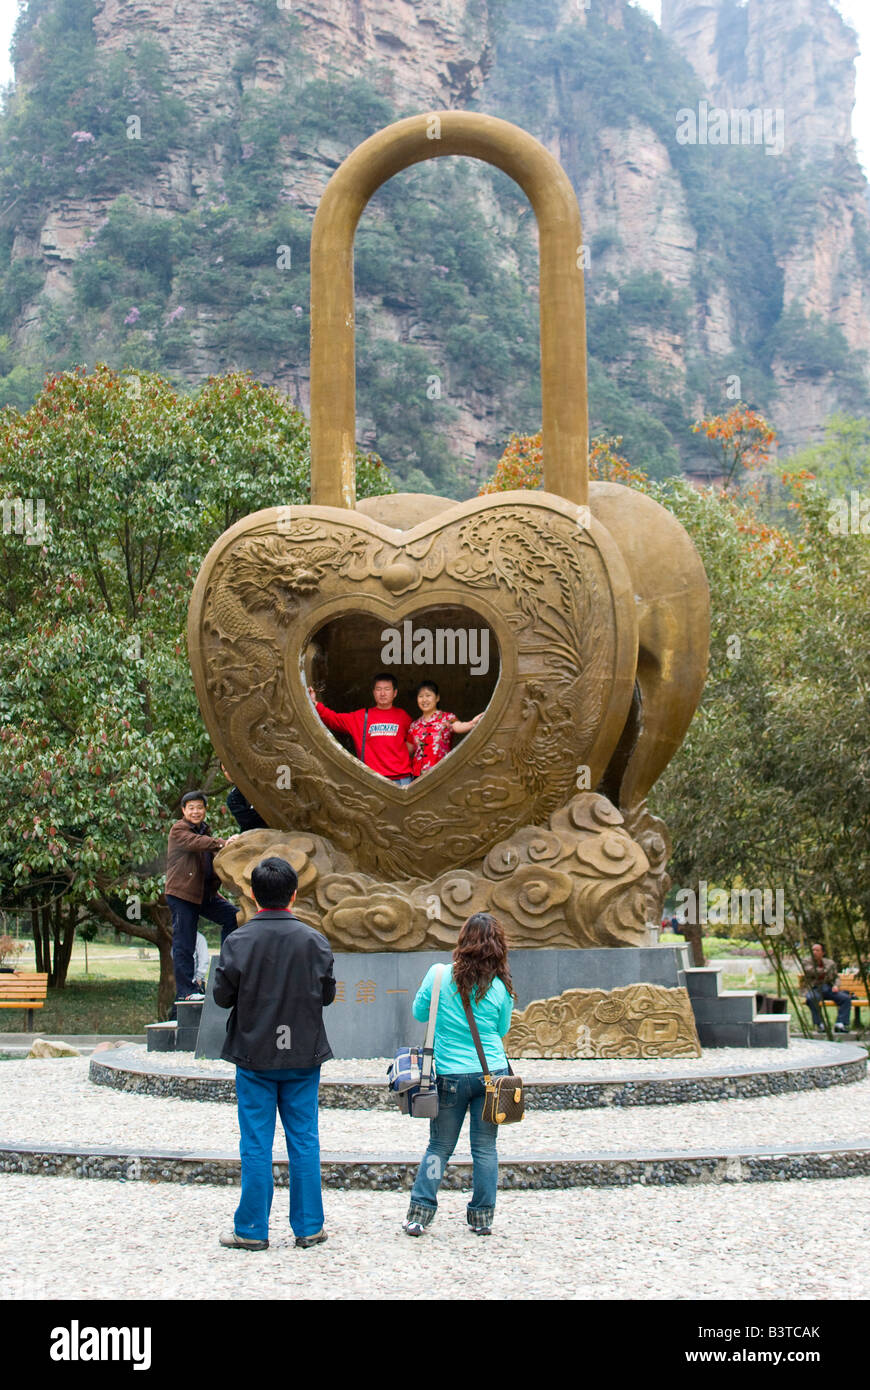 Asia, China, Hunnan Province, Zhangjiajie National Forest Park. Bronze Love Lock sculpture is a popular photo spot with tourists Stock Photo